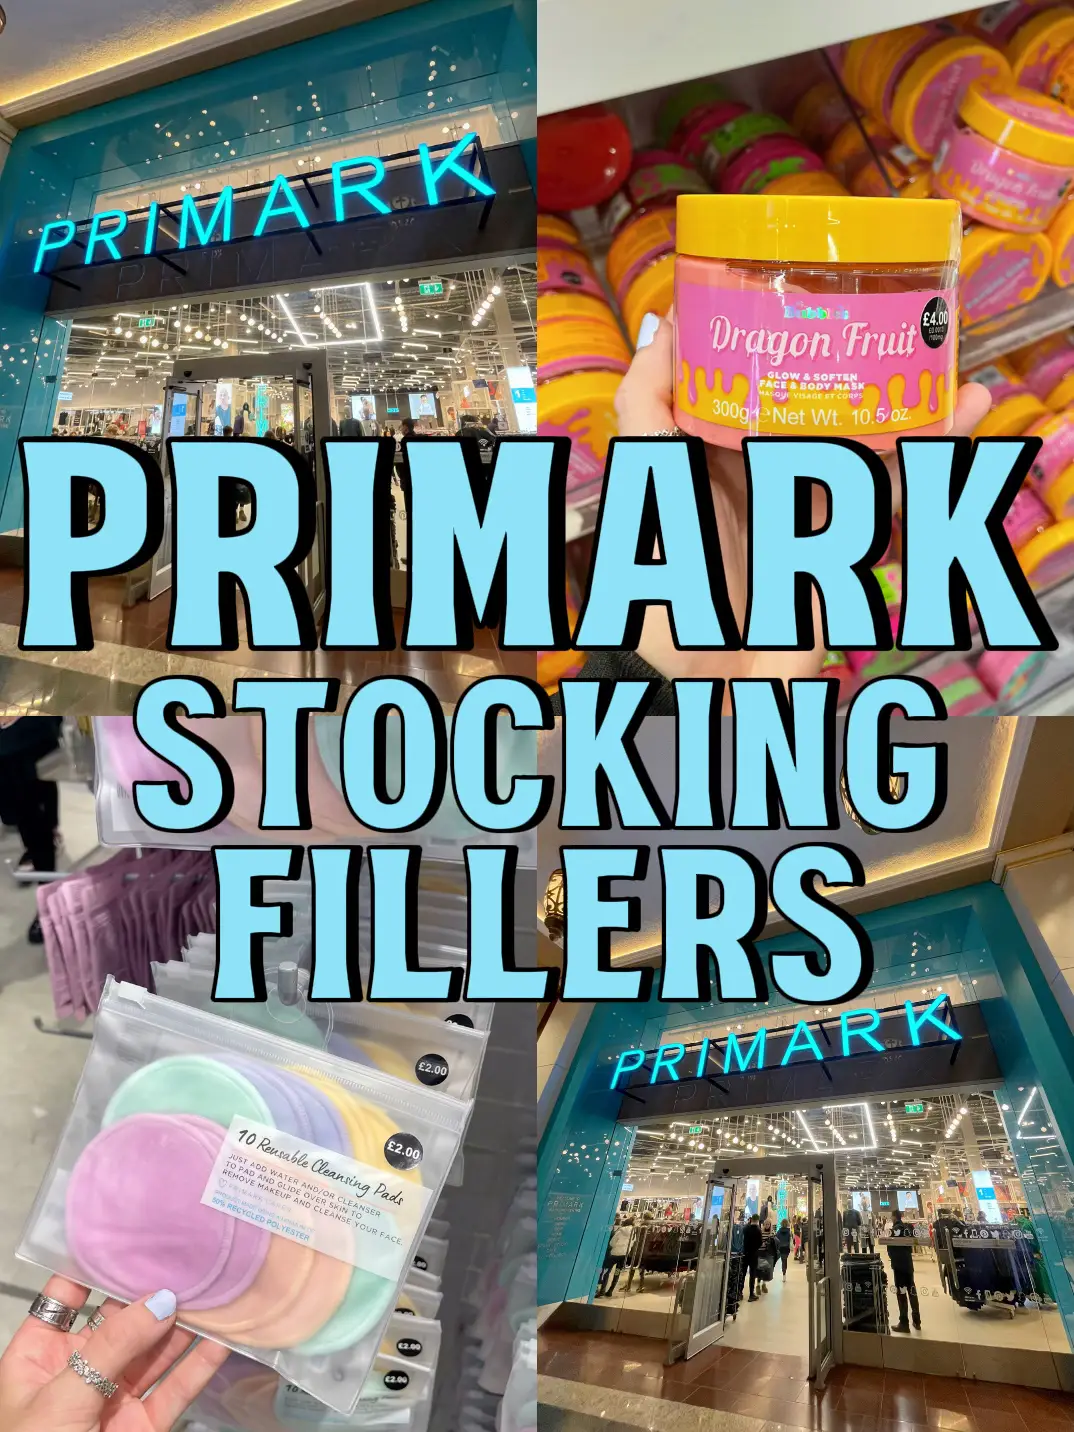 Were back boos, would you bloody believe it🖤 #primark